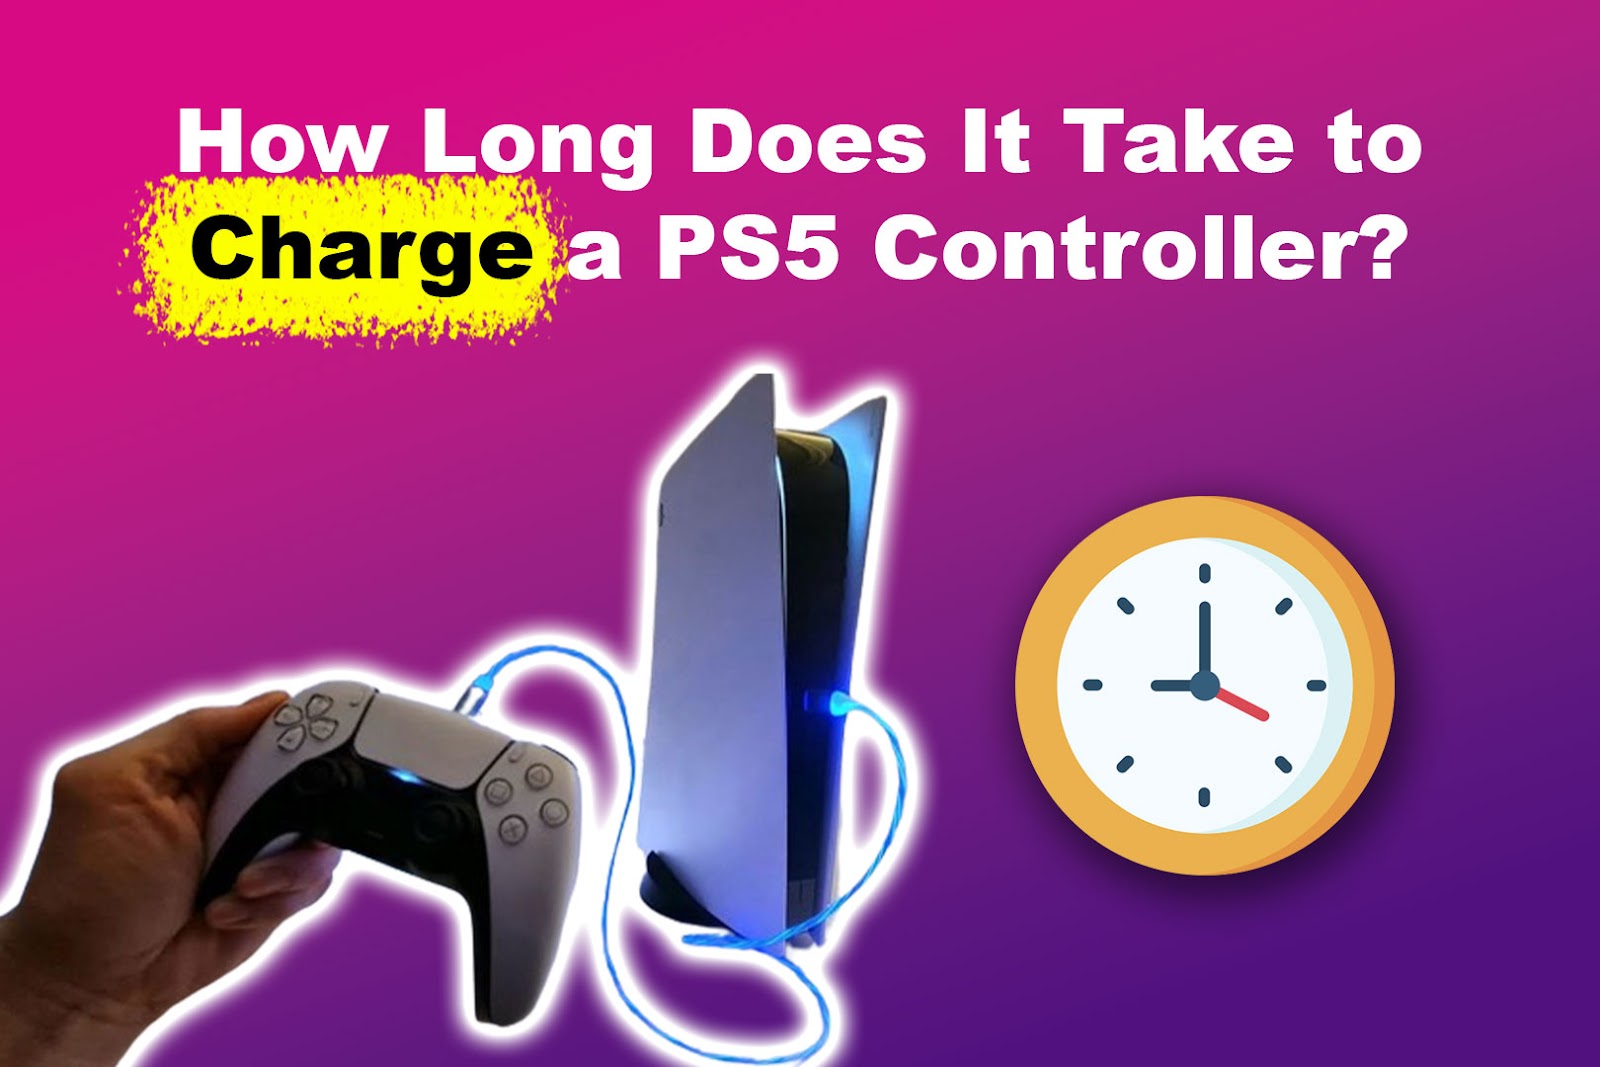 PS5 Controller Charging Time [And How to Charge It Faster]